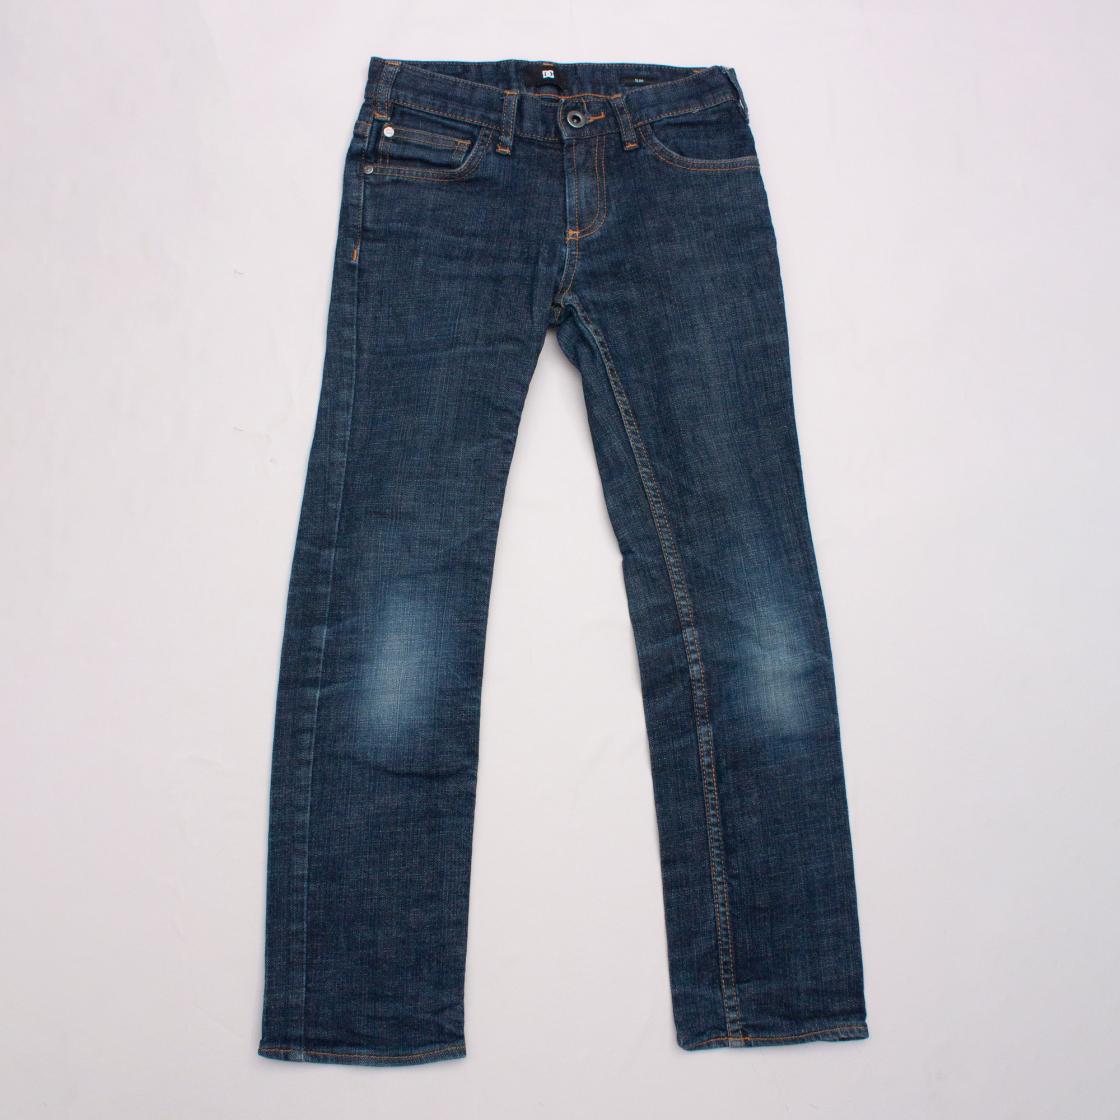 DC Distressed Jeans 